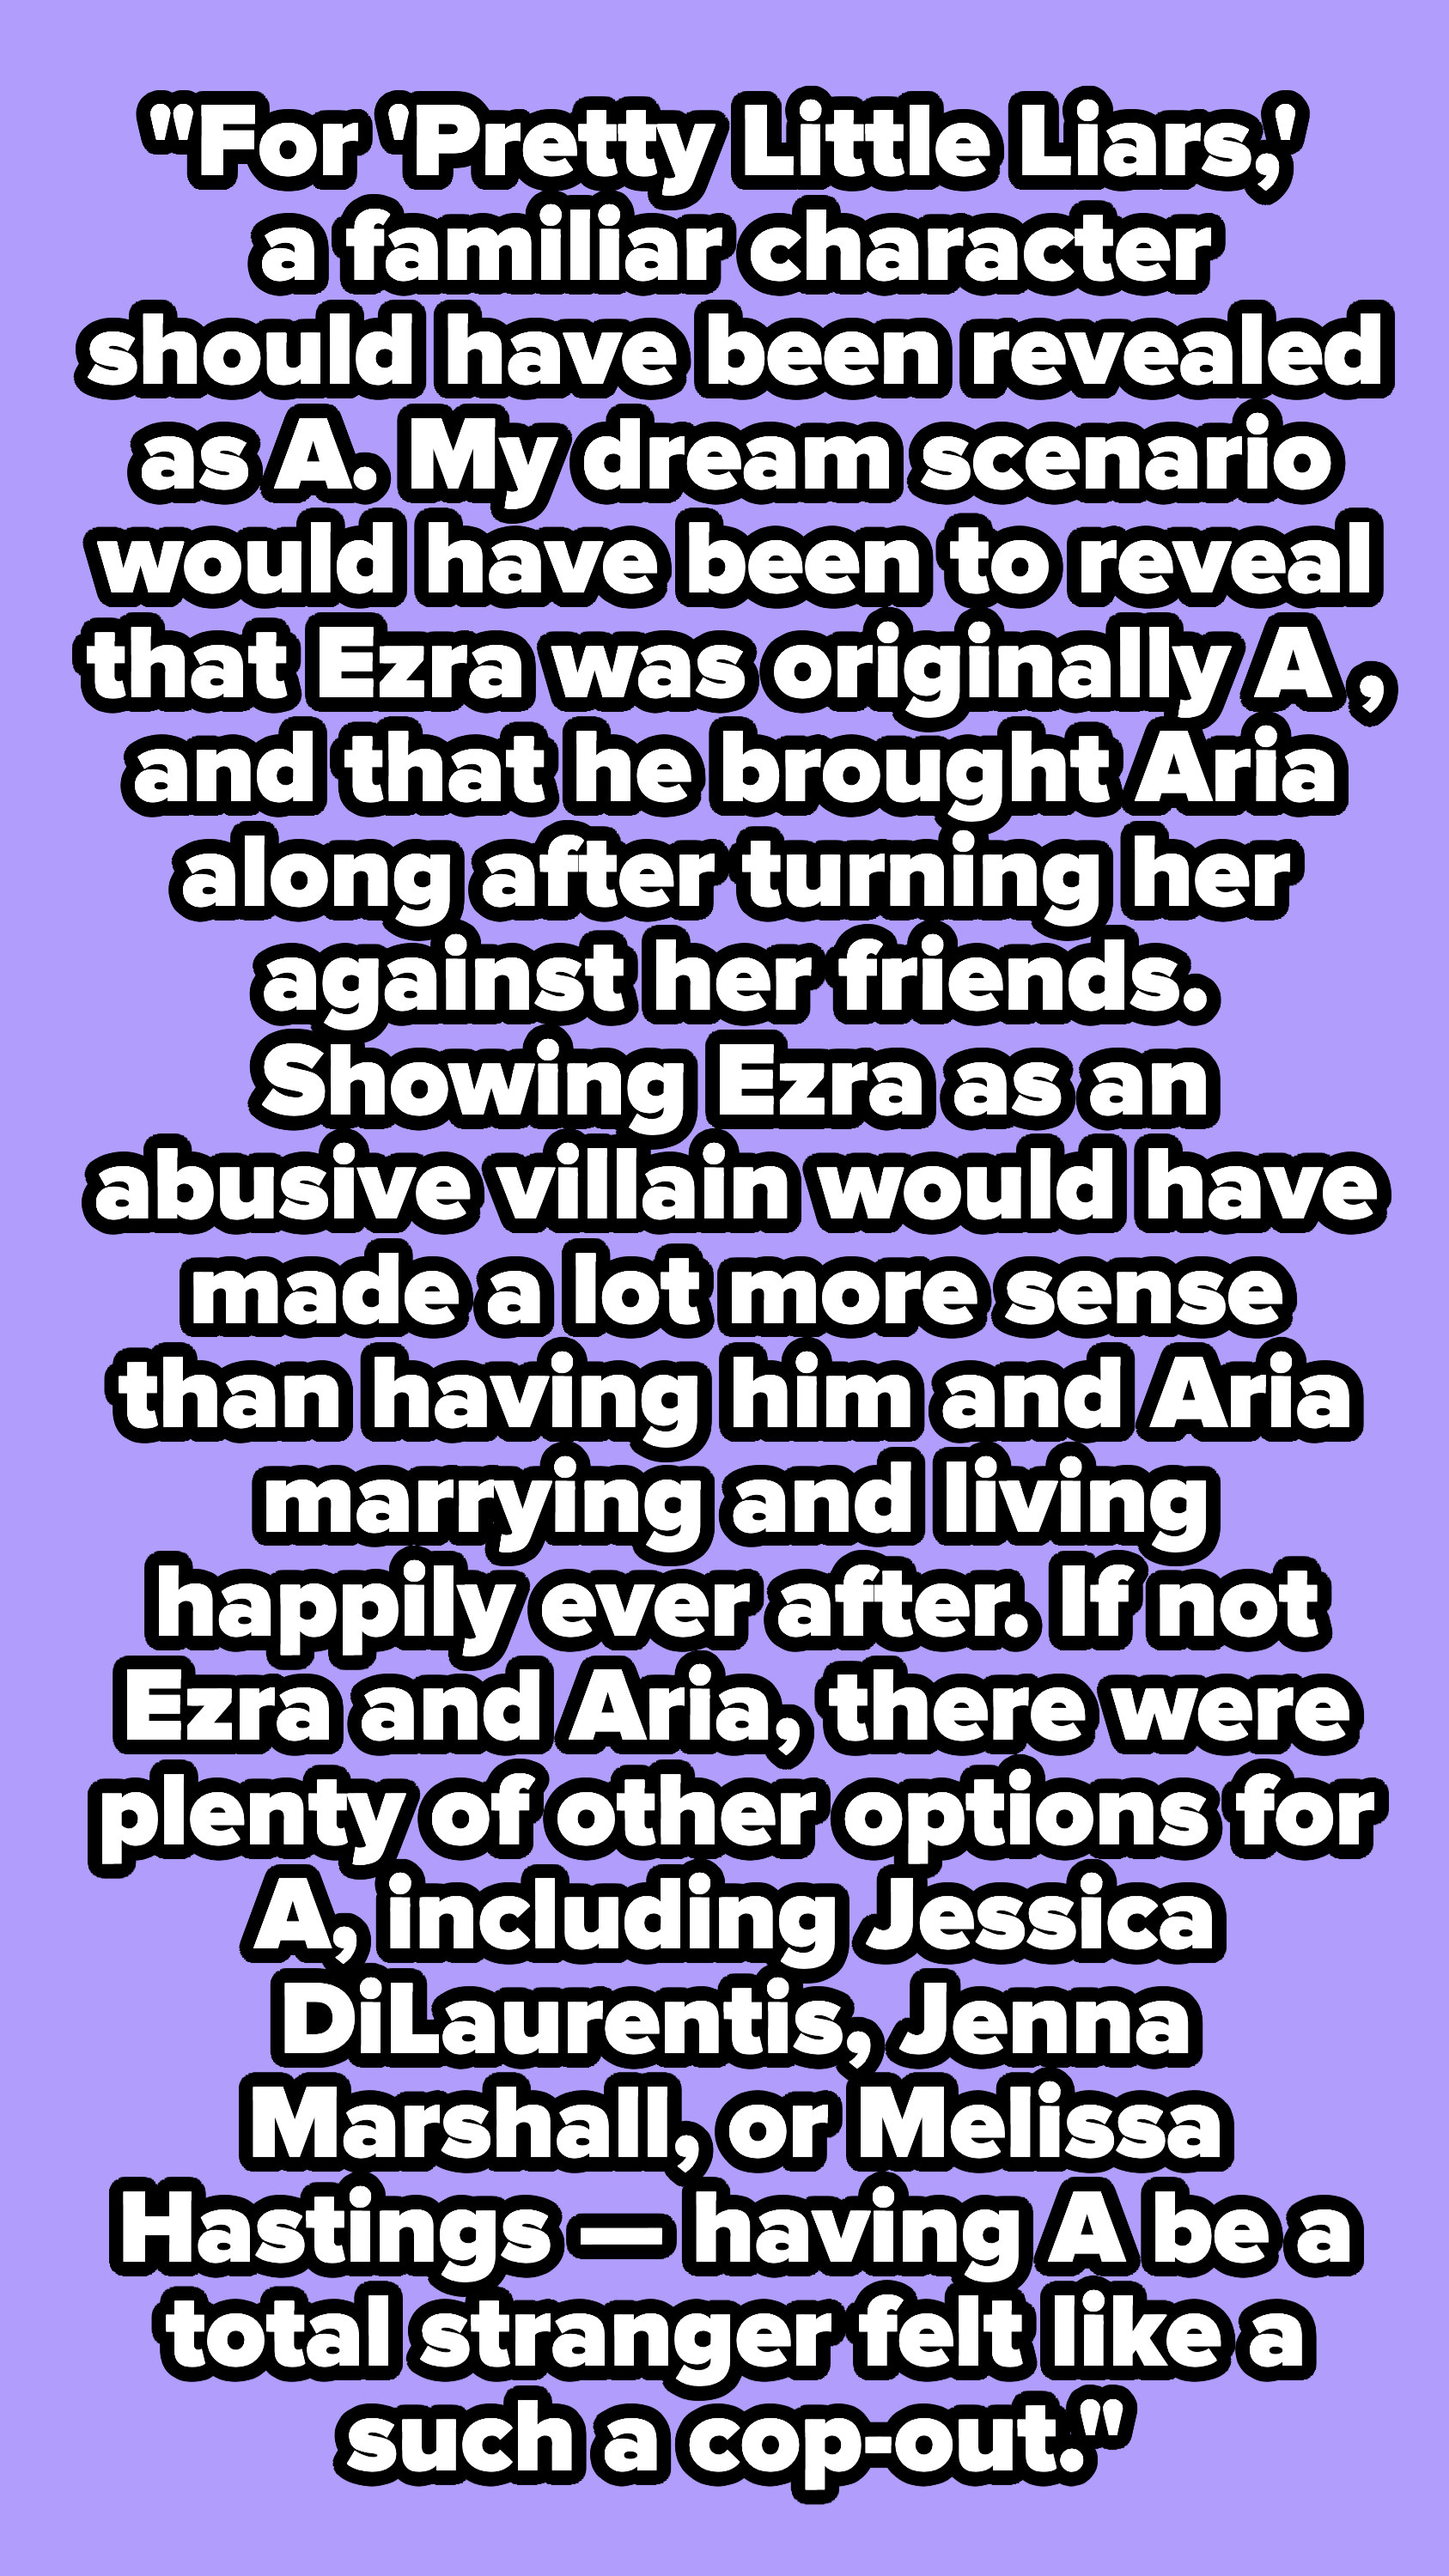 &quot;For &#x27;Pretty Little Liars,&#x27; a familiar character should have been revealed as A. My dream scenario would have been to reveal that Ezra was originally A.&quot;